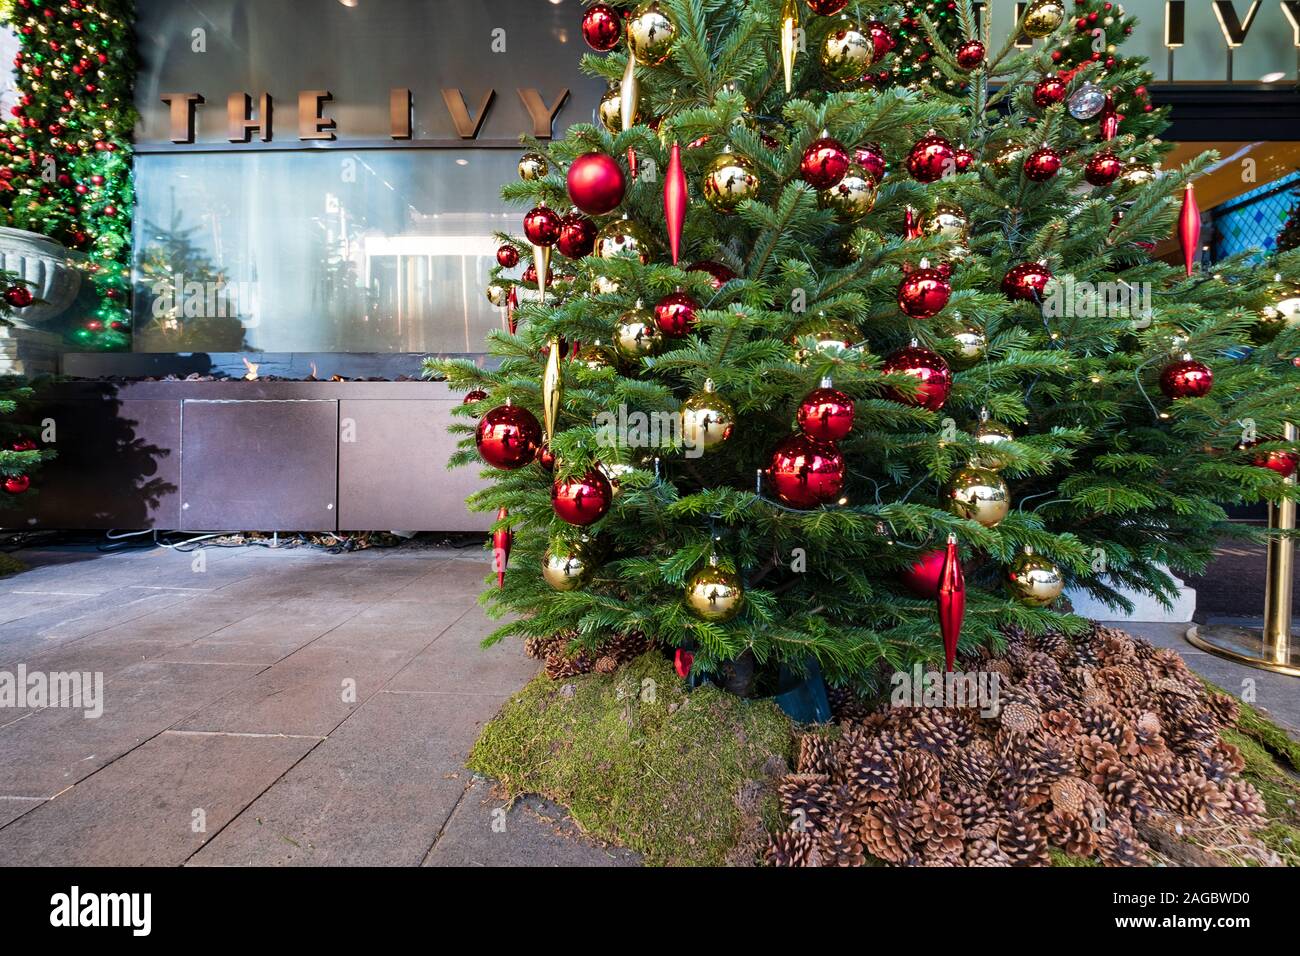 The Ivy Restaurant Christmas High Resolution Stock Photography And Images Alamy